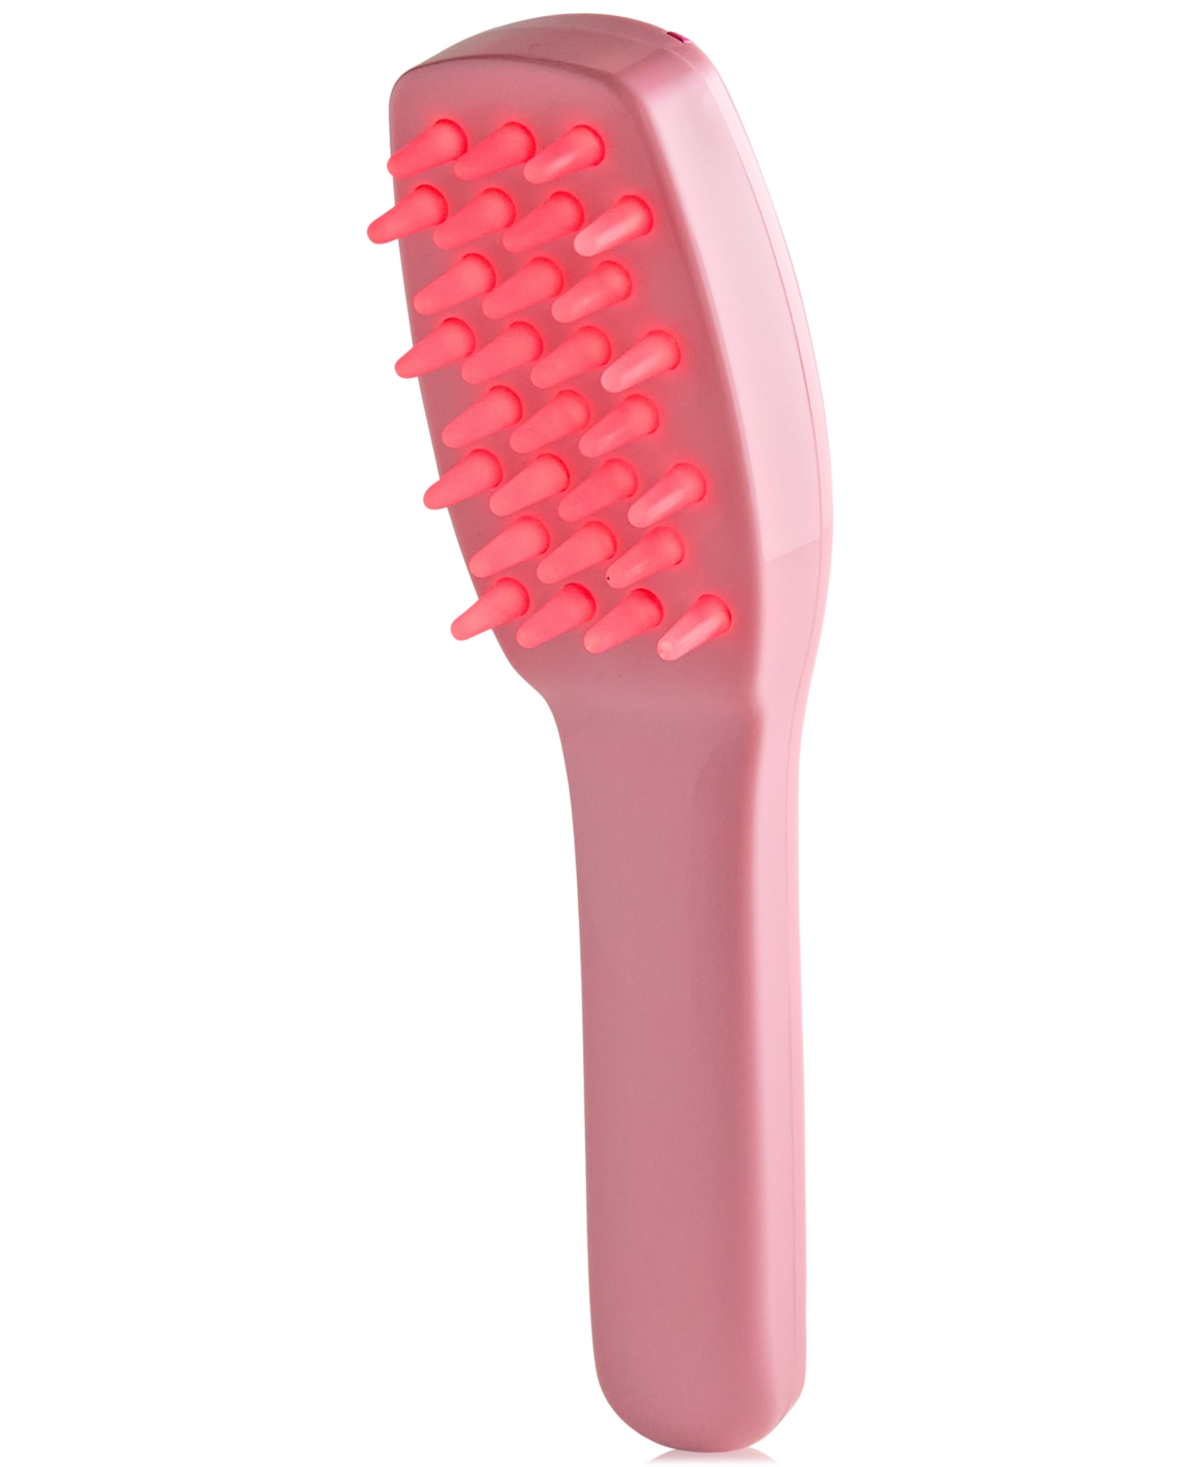 Shop Skin Gym Hair & Scalp Led Light Therapy Tool In No Color